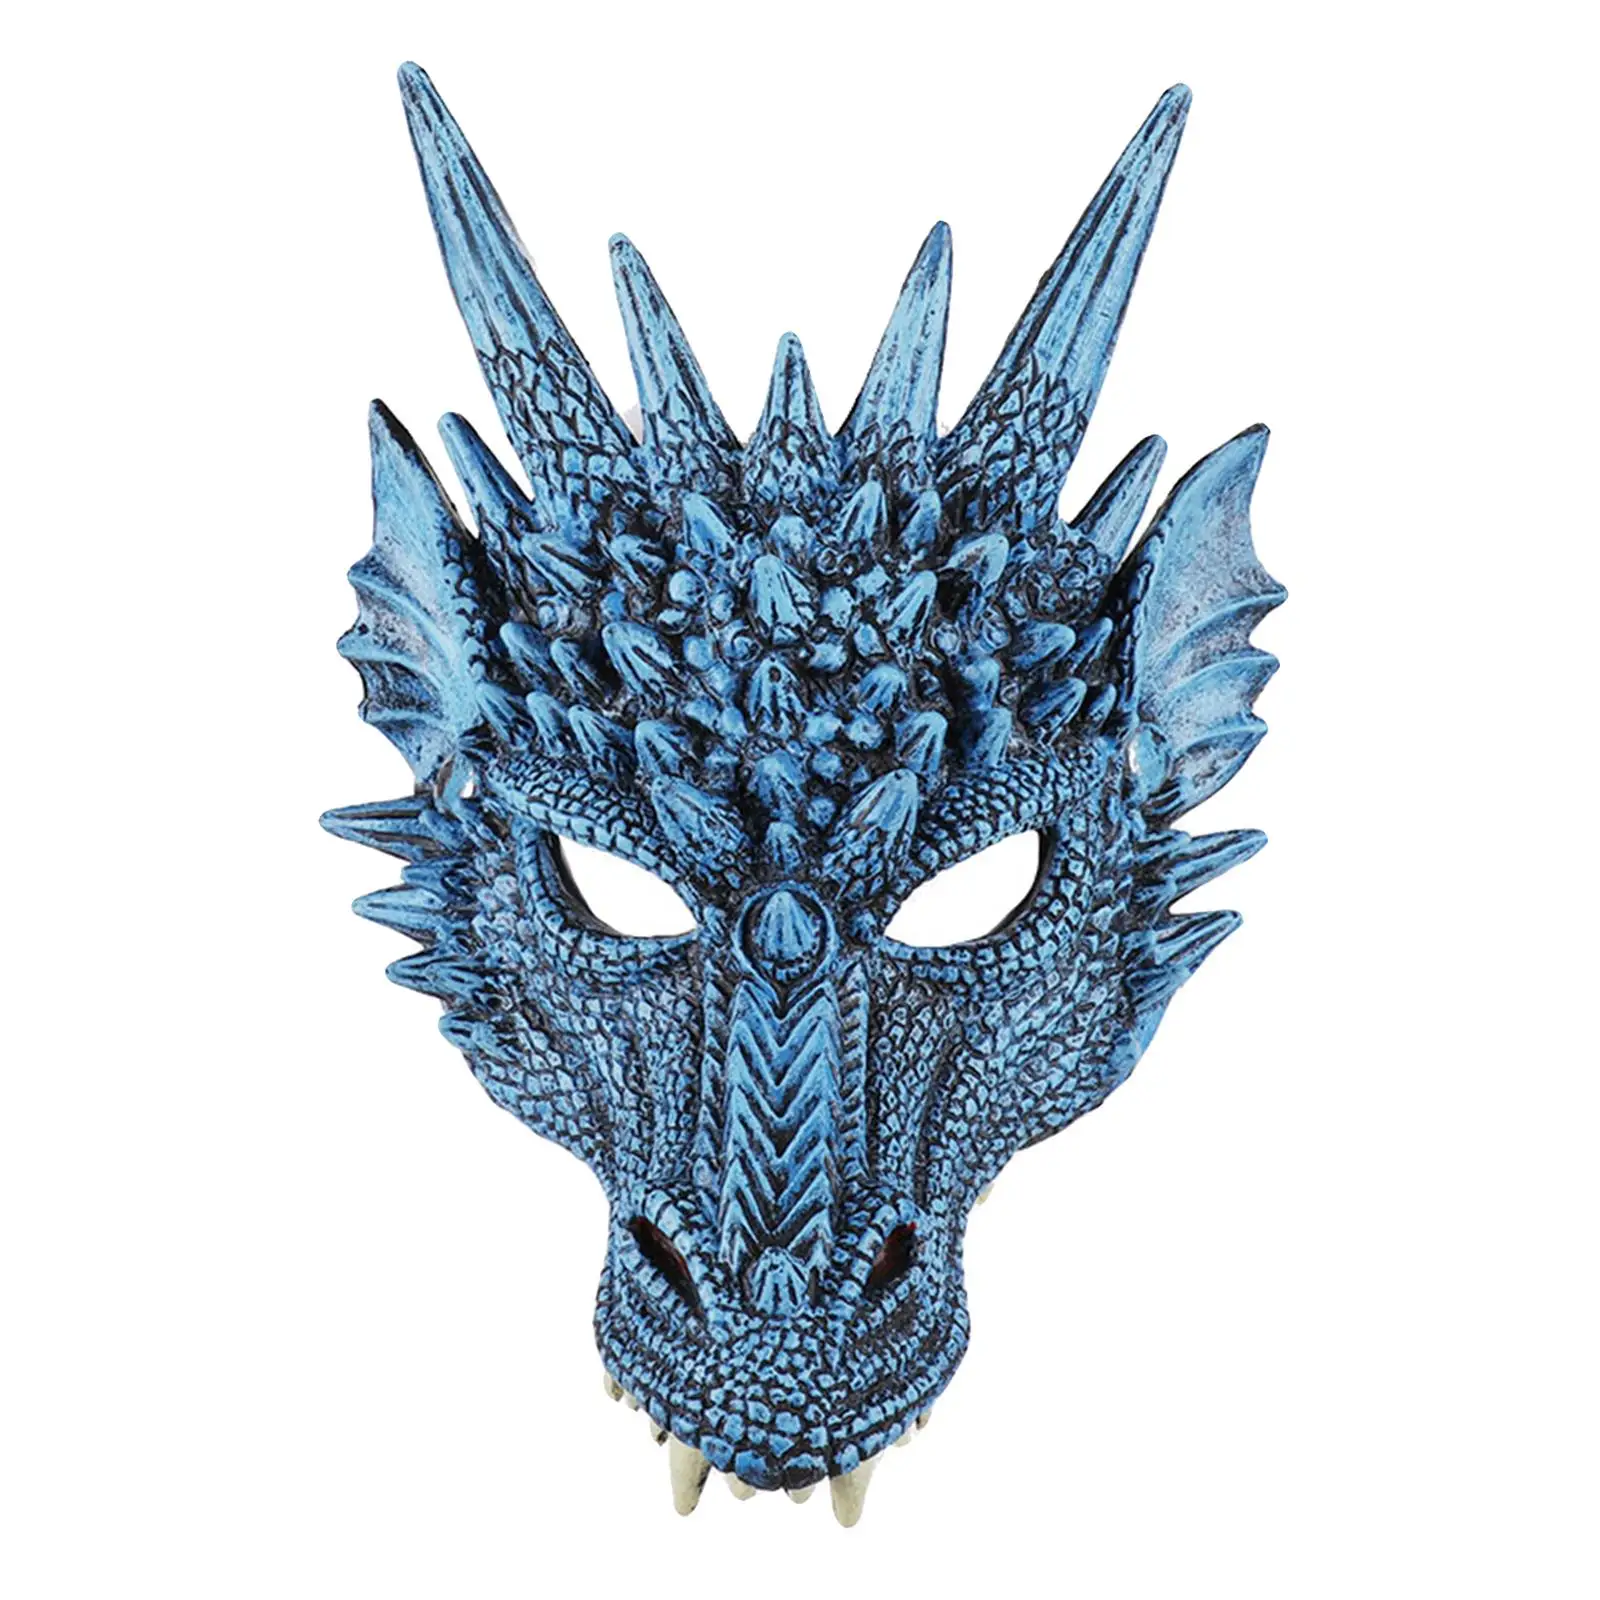  Dragon  Full Overhead Cover for Adults Women  Masquerade Fancy Dress